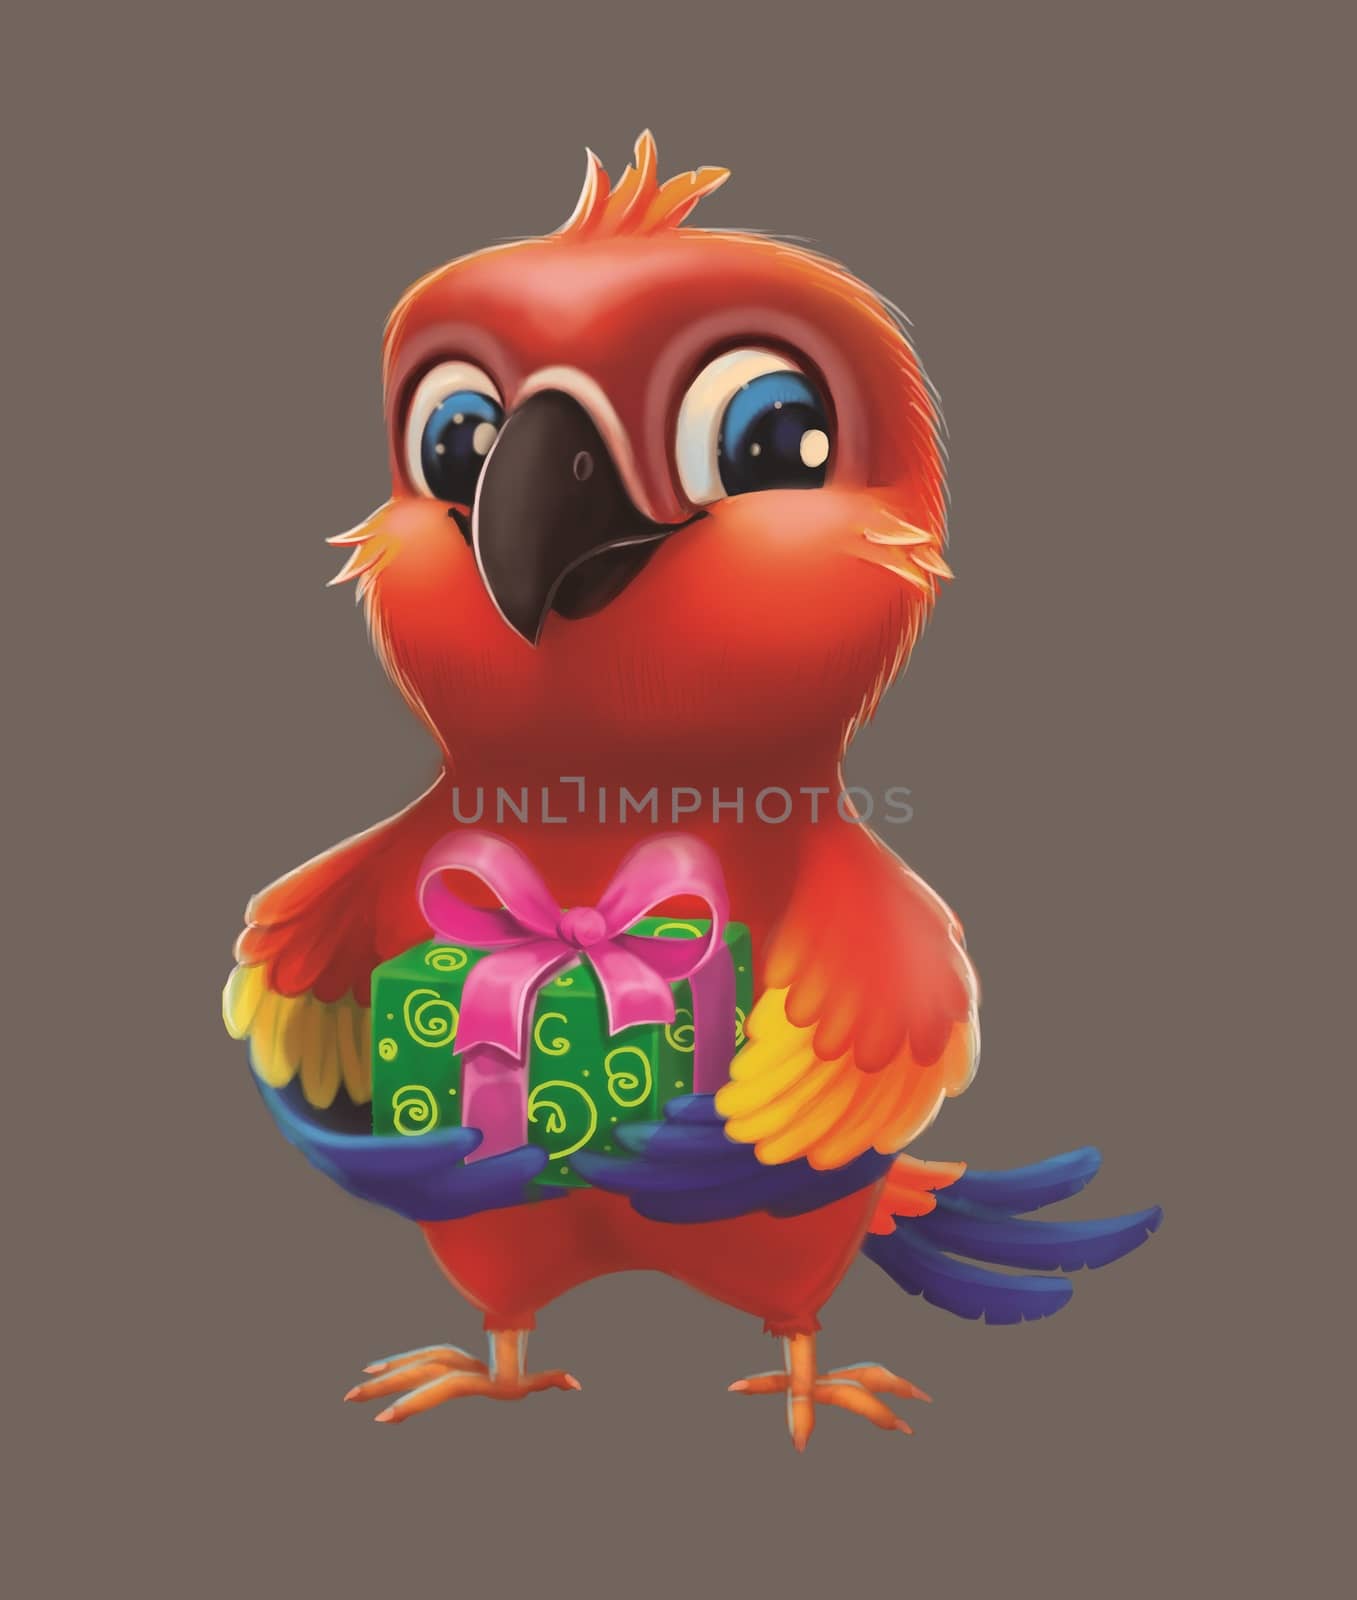 Mascot Element for Greeting or Post Card, Banner, Gift Card, Poster, Booklet or Children's Book
